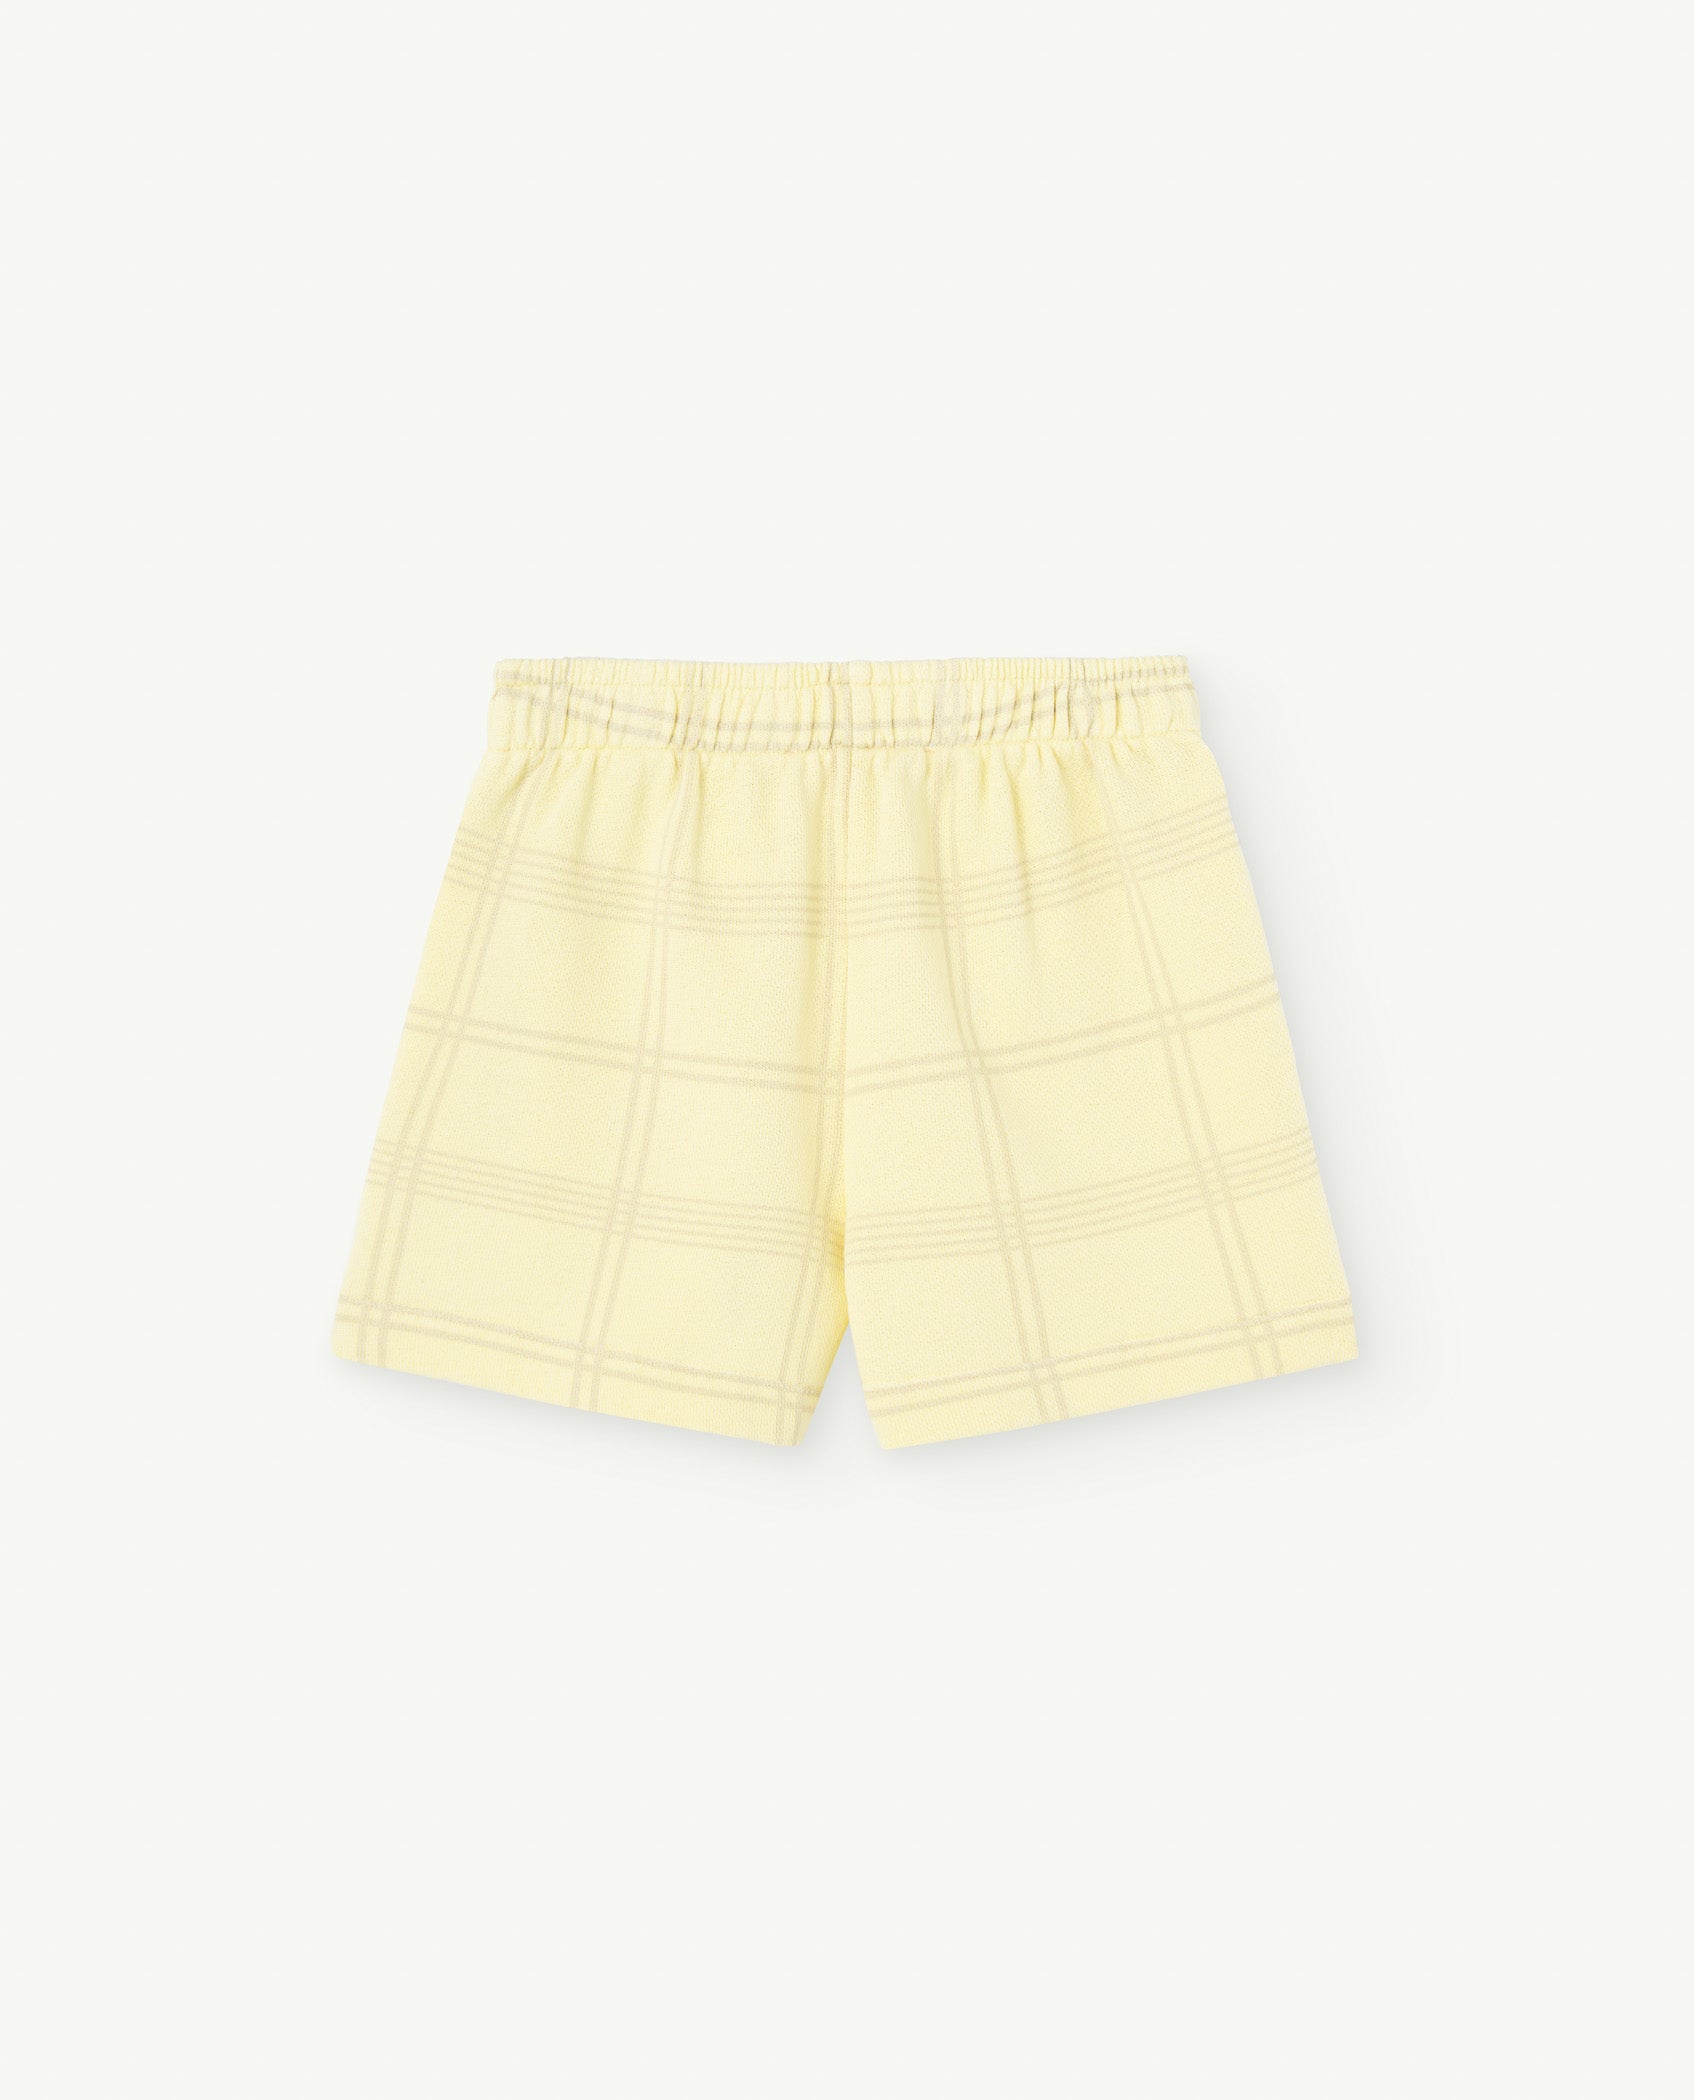 The animals observatory - hedgehog kids shorts - soft yellow